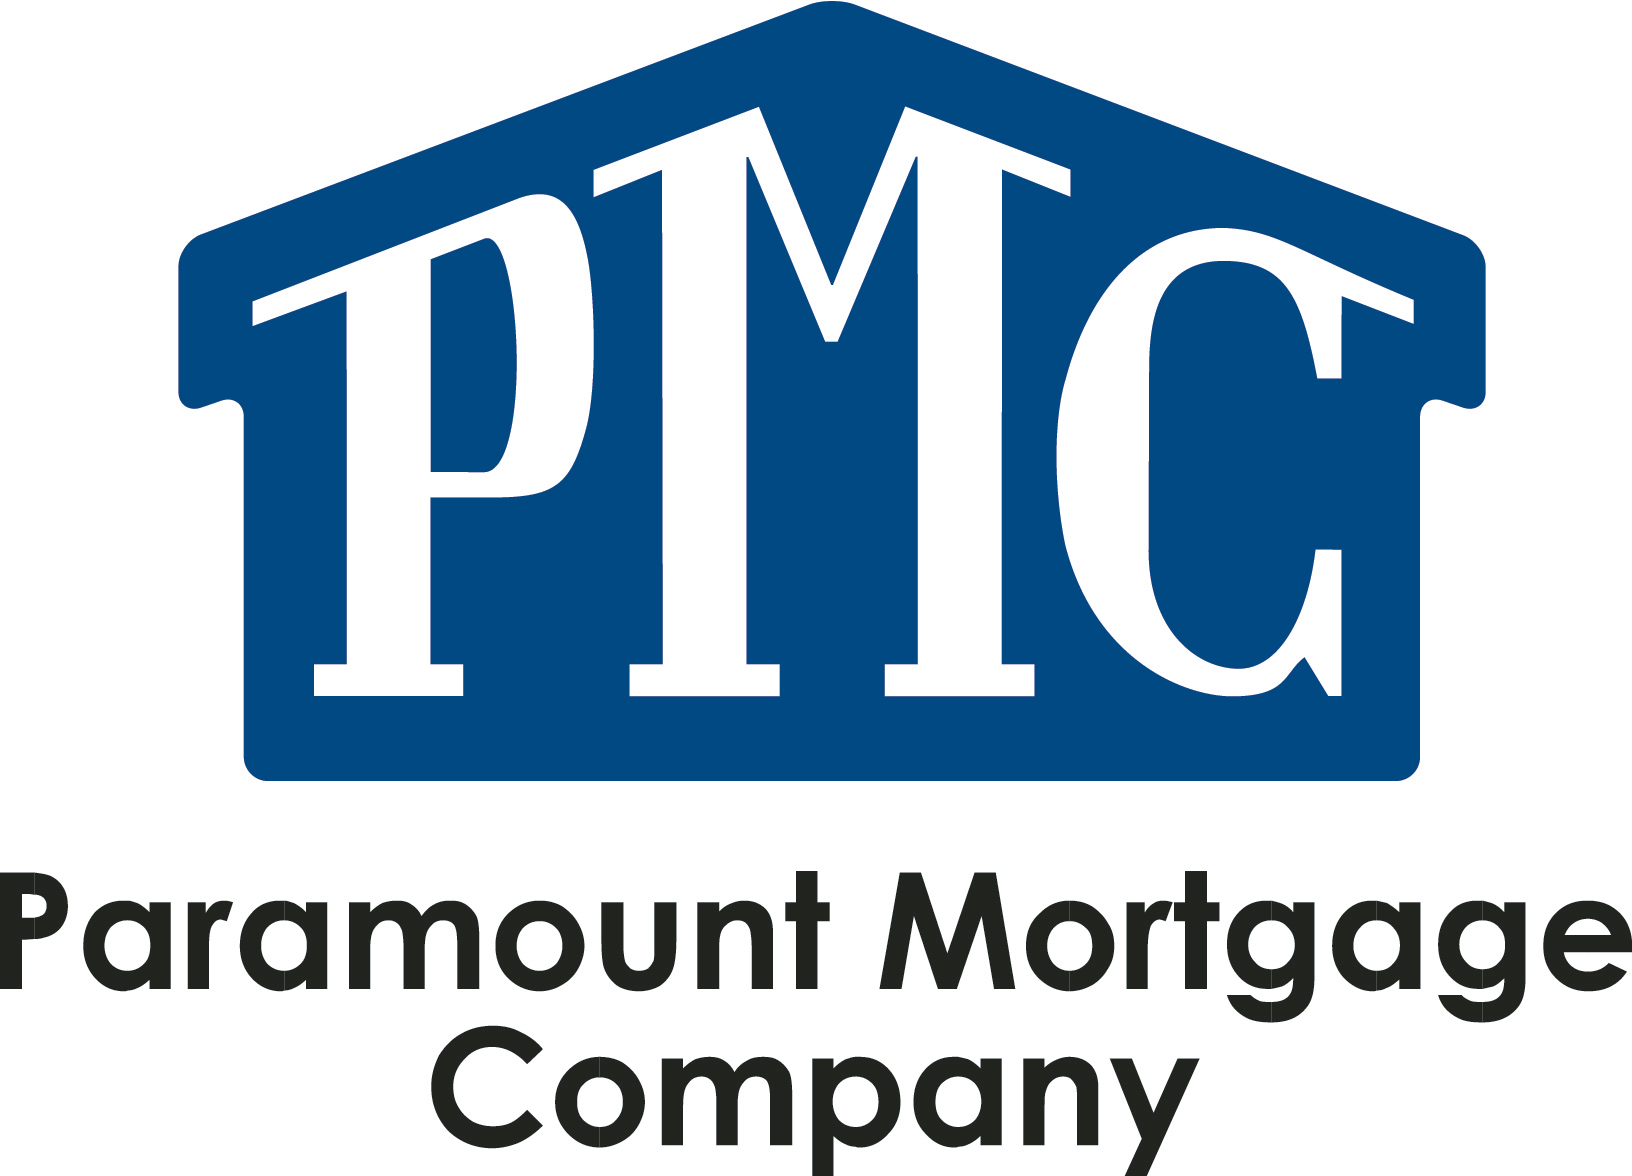 St. Louis Mortgage Company